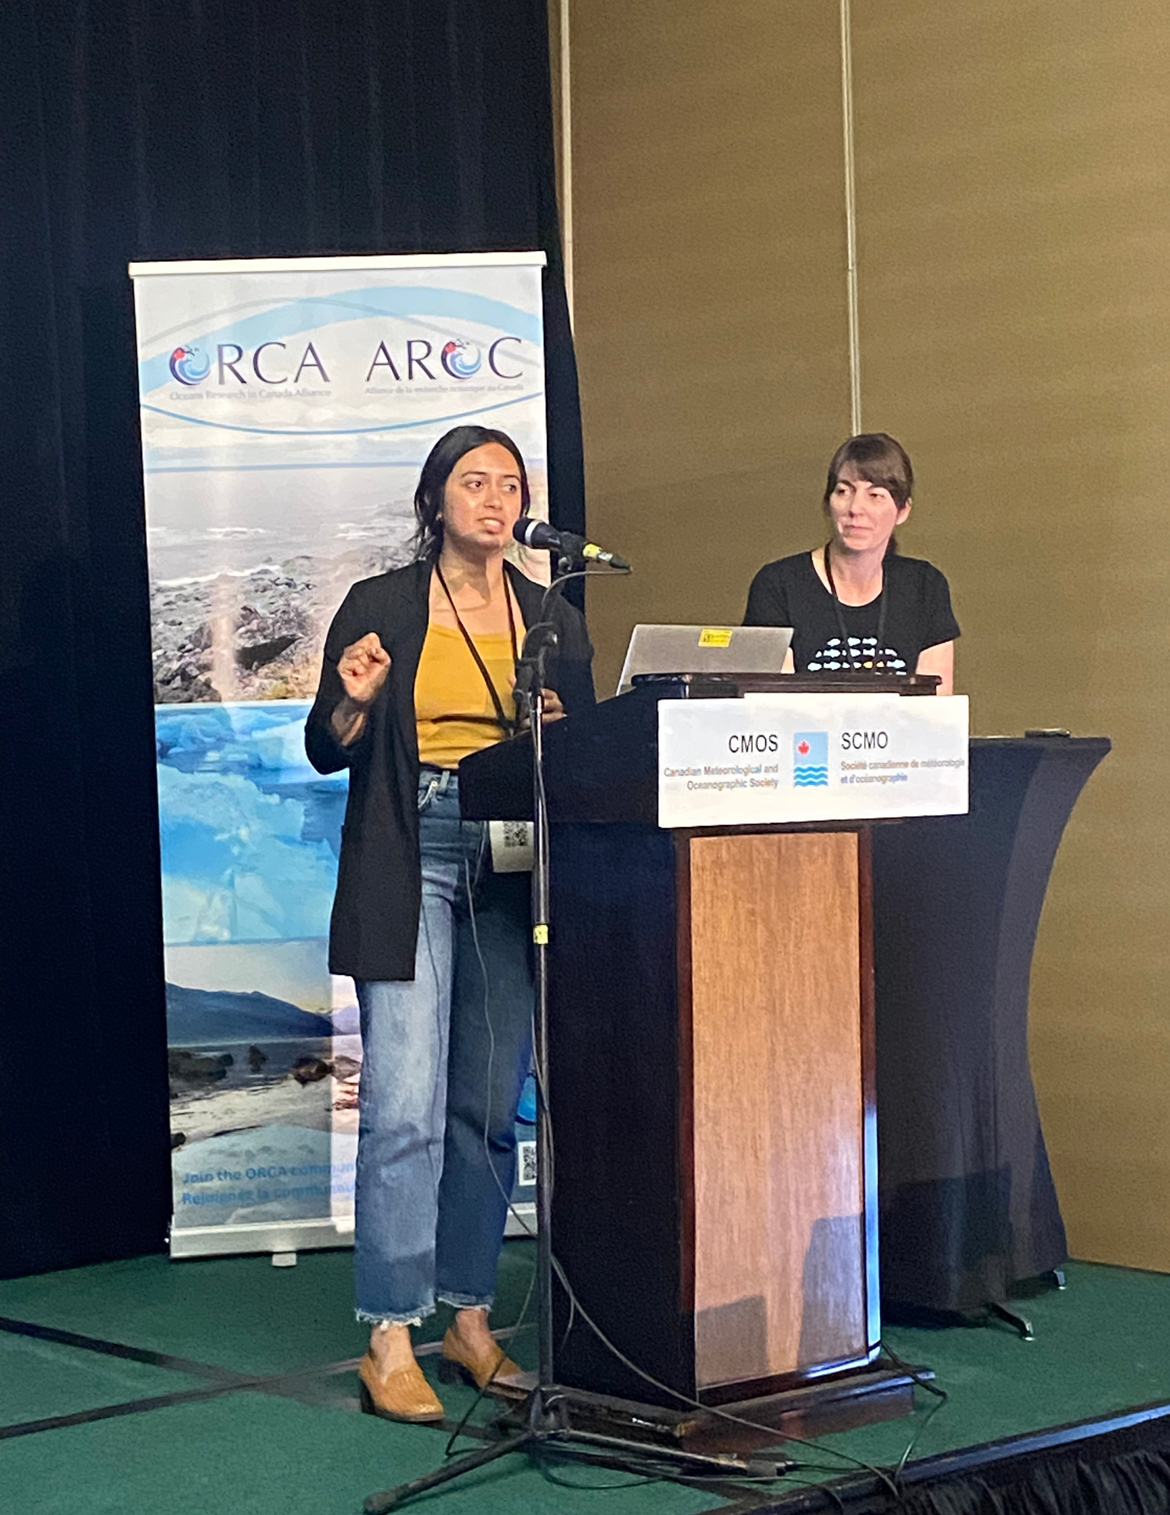 Two women stand at the podium. Neha Acharya-Patel is mid-speech at the microphone, while Andi White is standing to her left. Behind them, there is an ORCA-AROC banner with ocean images.